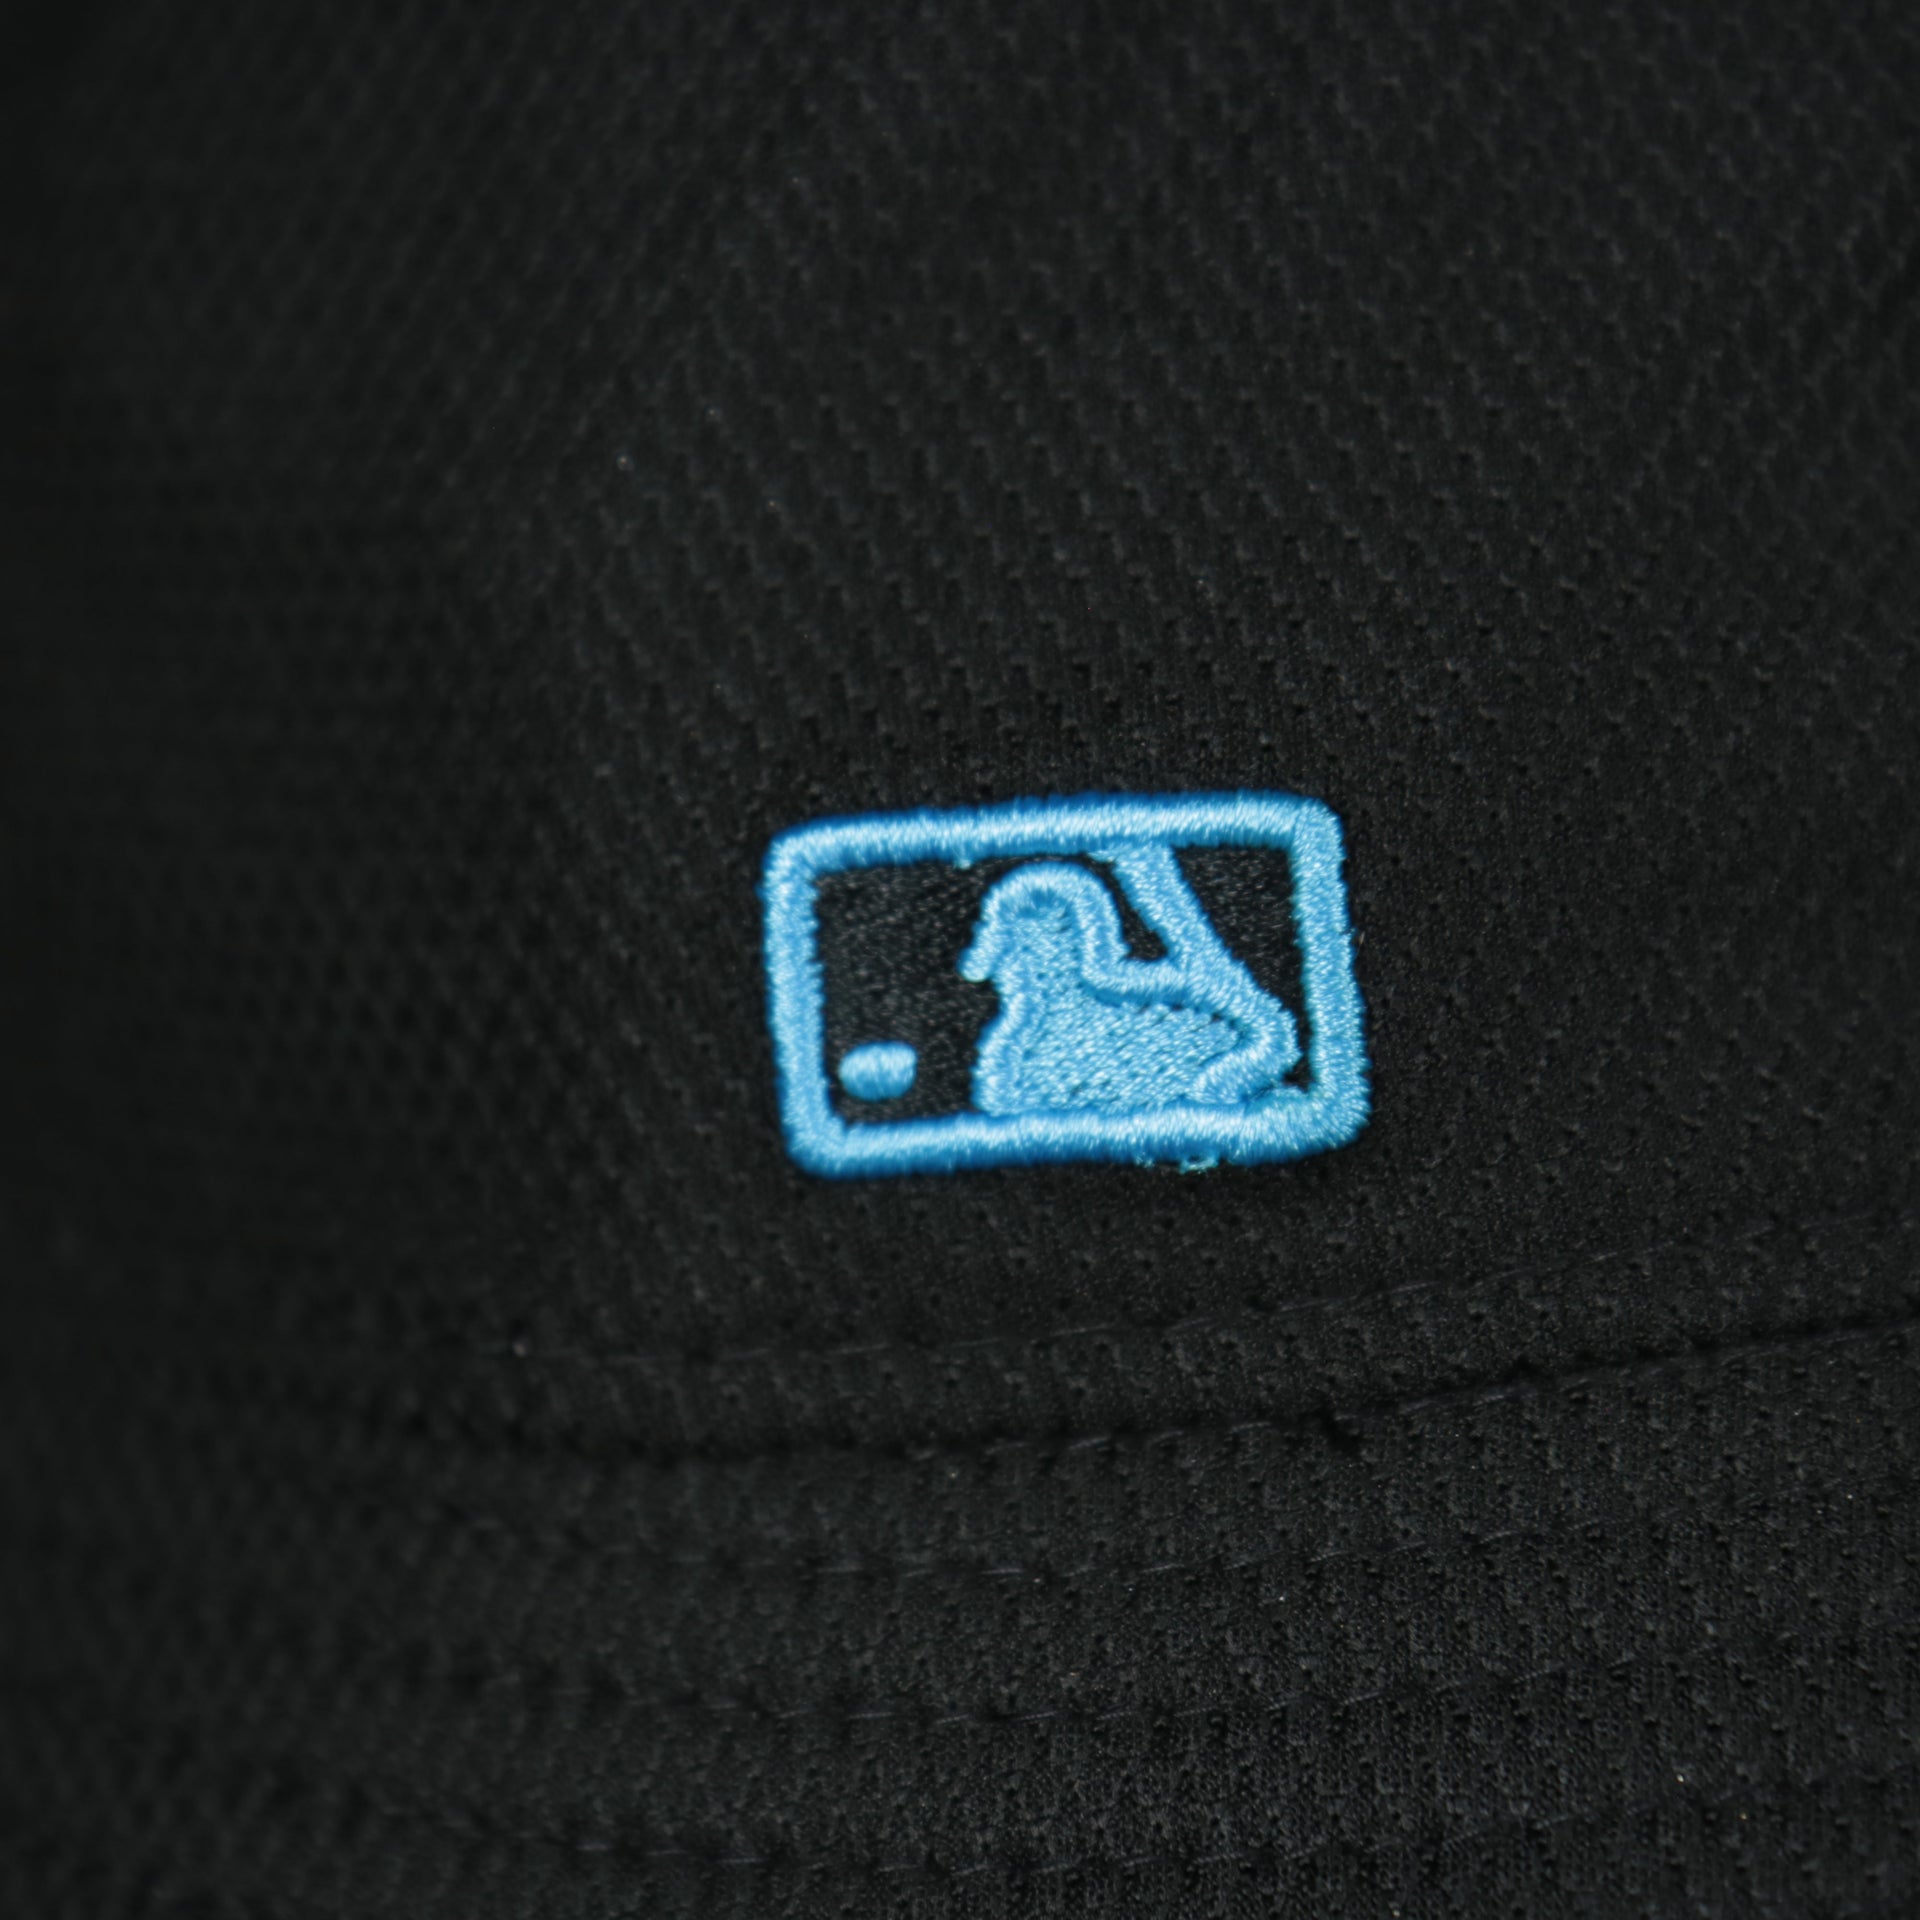 A close up of the MLB Batterman logo on the Miami Marlins MLB 2022 Spring Training Onfield Bucket Hat